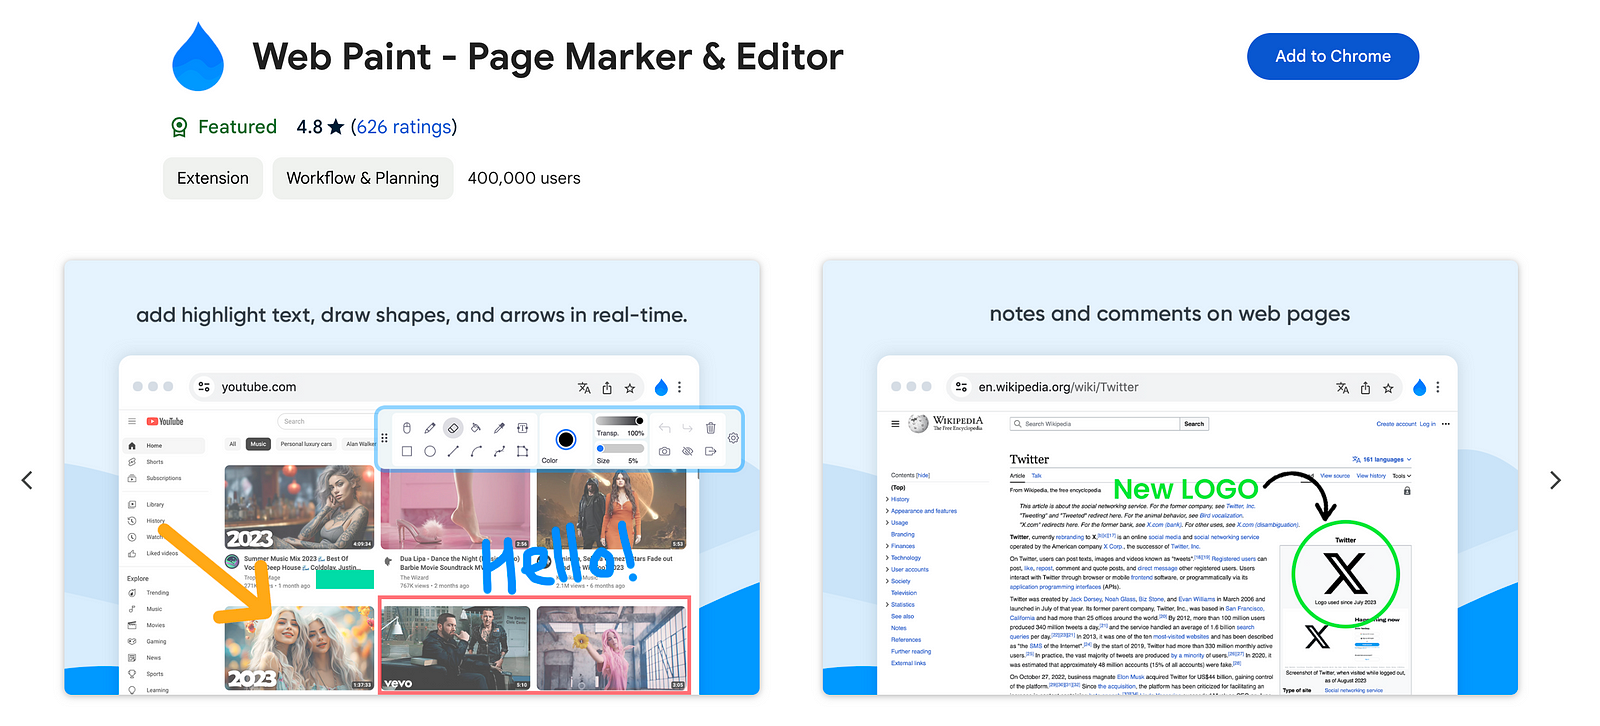 Web Paint — Page Marker & Editor